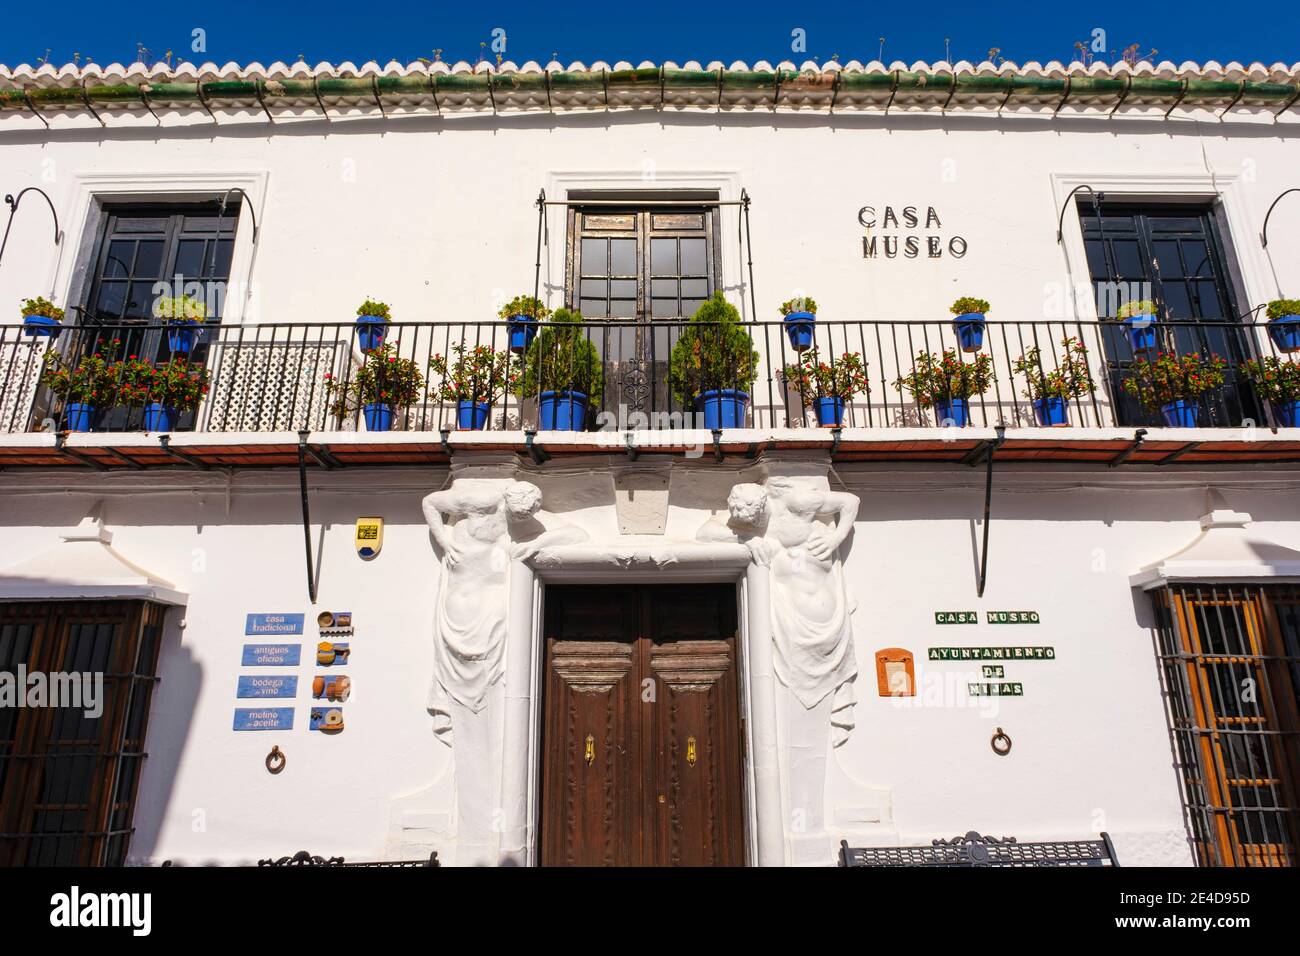 Casa Museo, Museum traditional arts. White village Mijas, Malaga province, Costa del Sol, southern Andalusia. Spain Europe Stock Photo